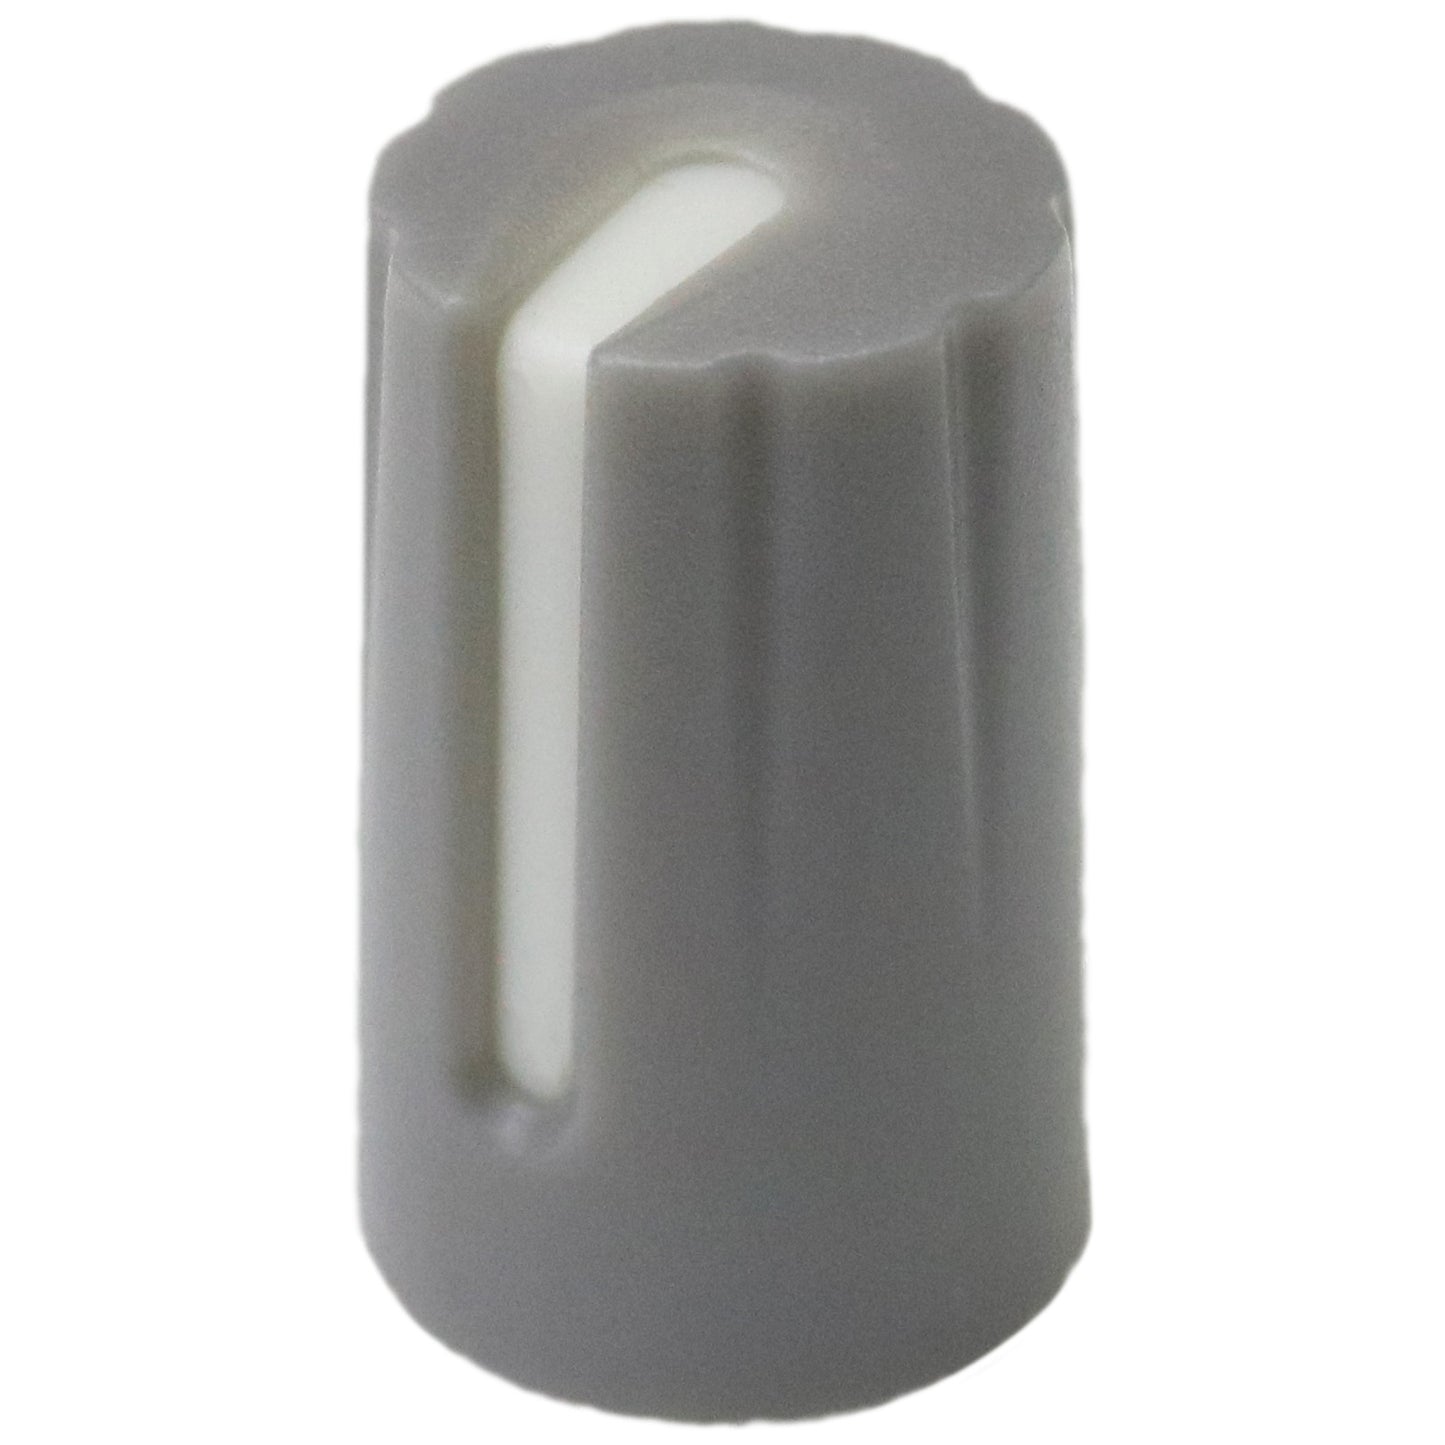 Slim Colour Body Control Knob With Recessed Position Indicator